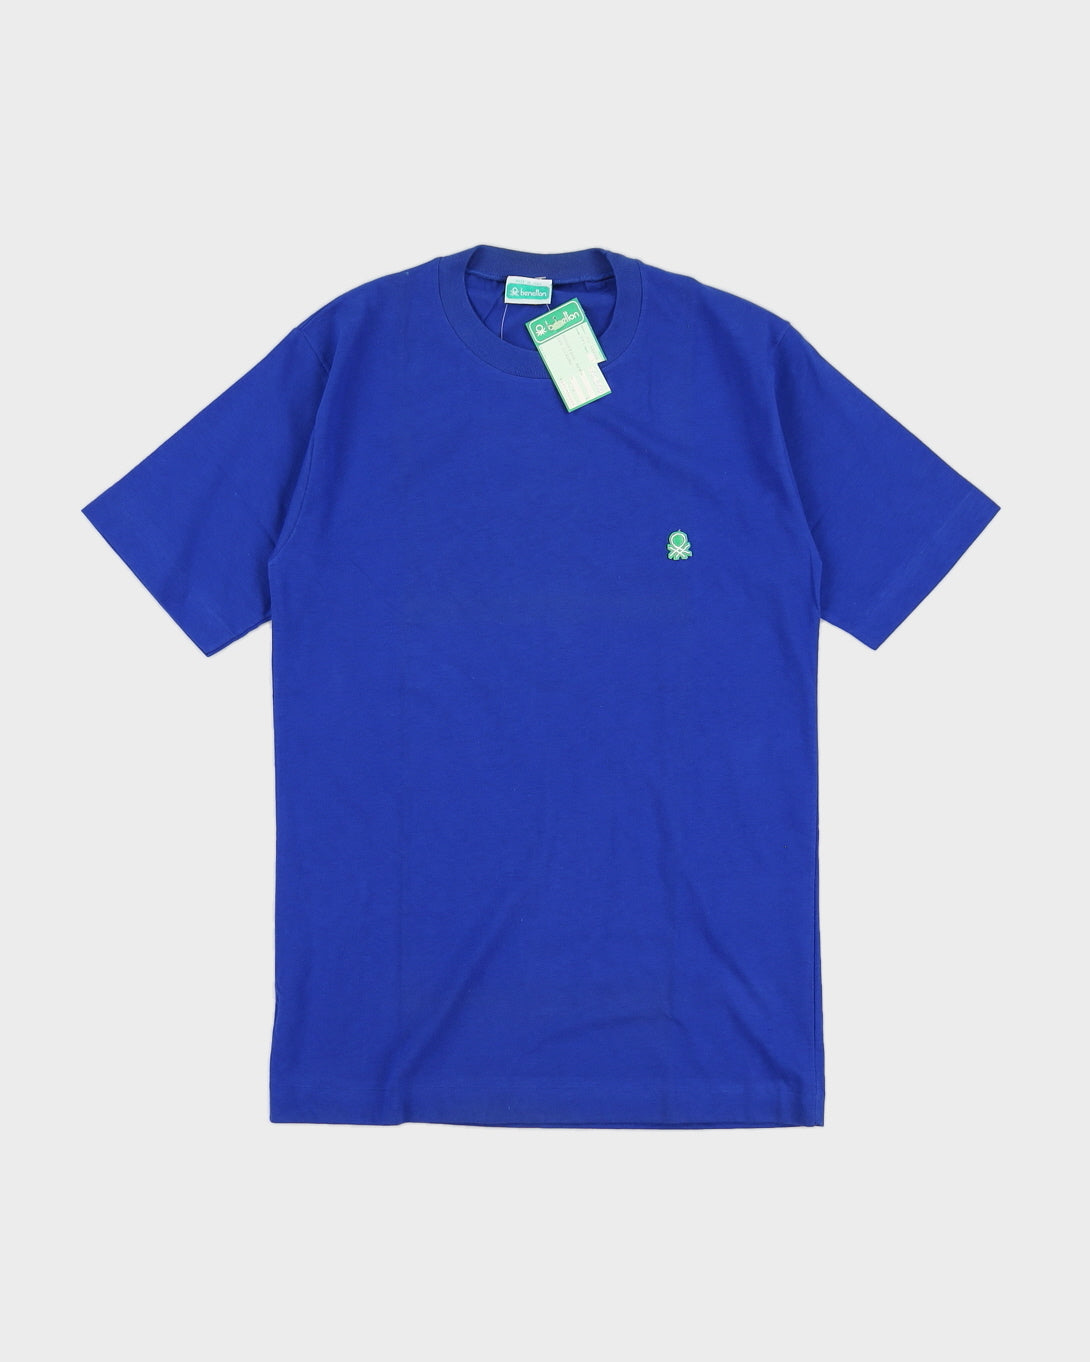 Vintage 70s Benetton Blue T-Shirt Deadstock With Tags - S